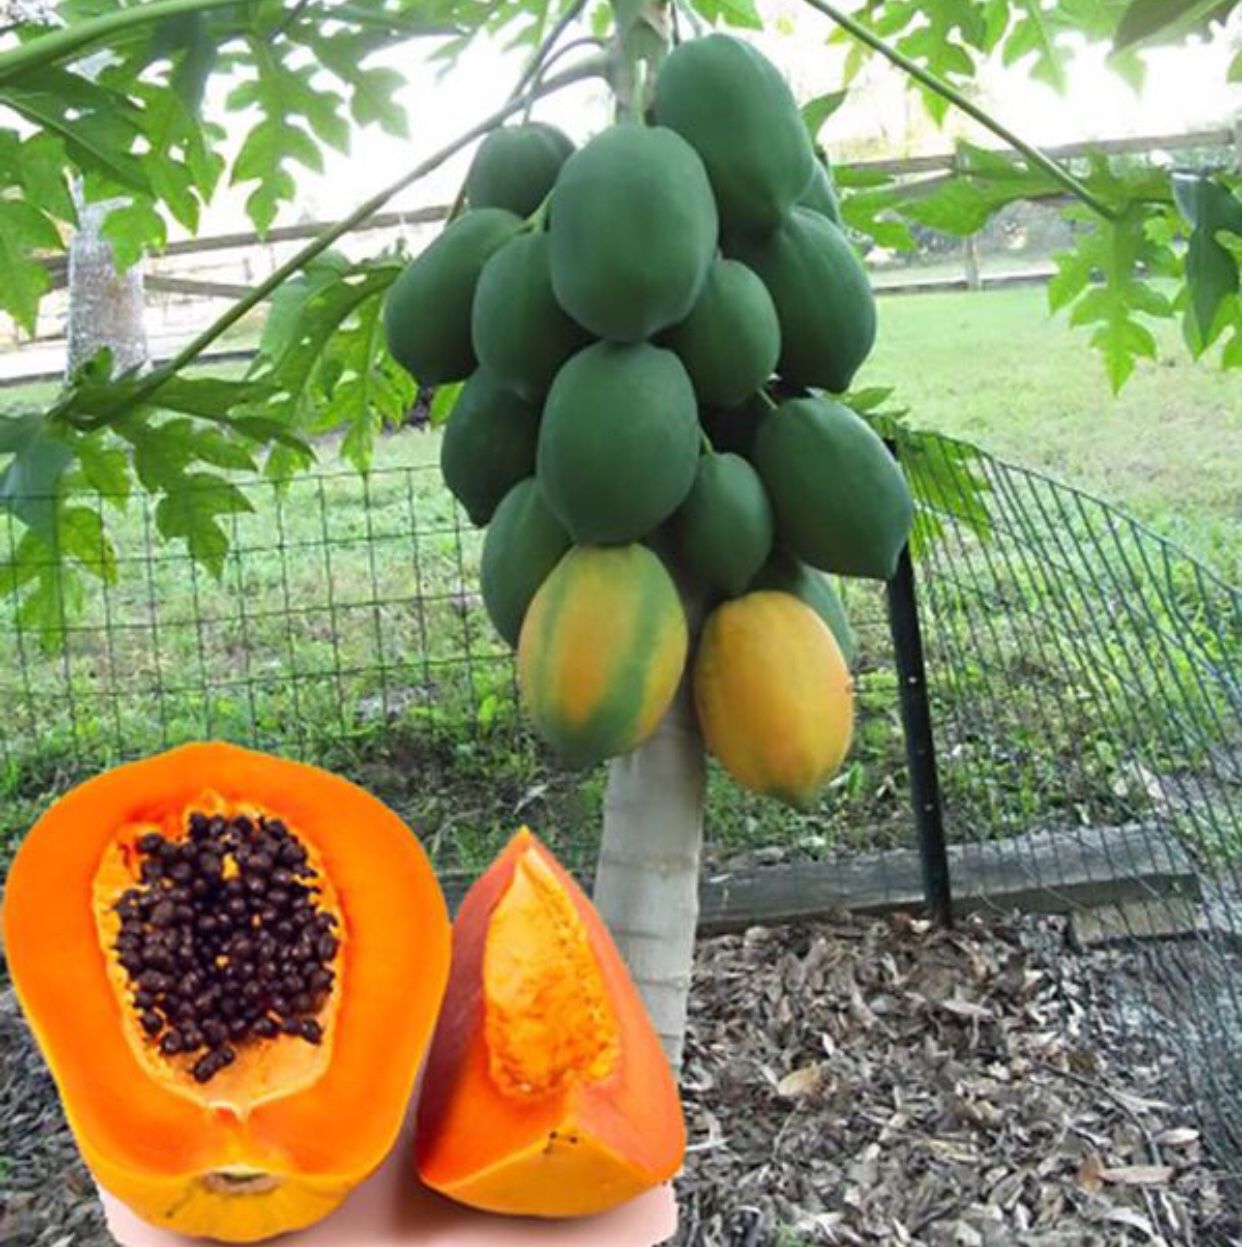 Papaya-pawpaw plants / Only four left asking $20 for all